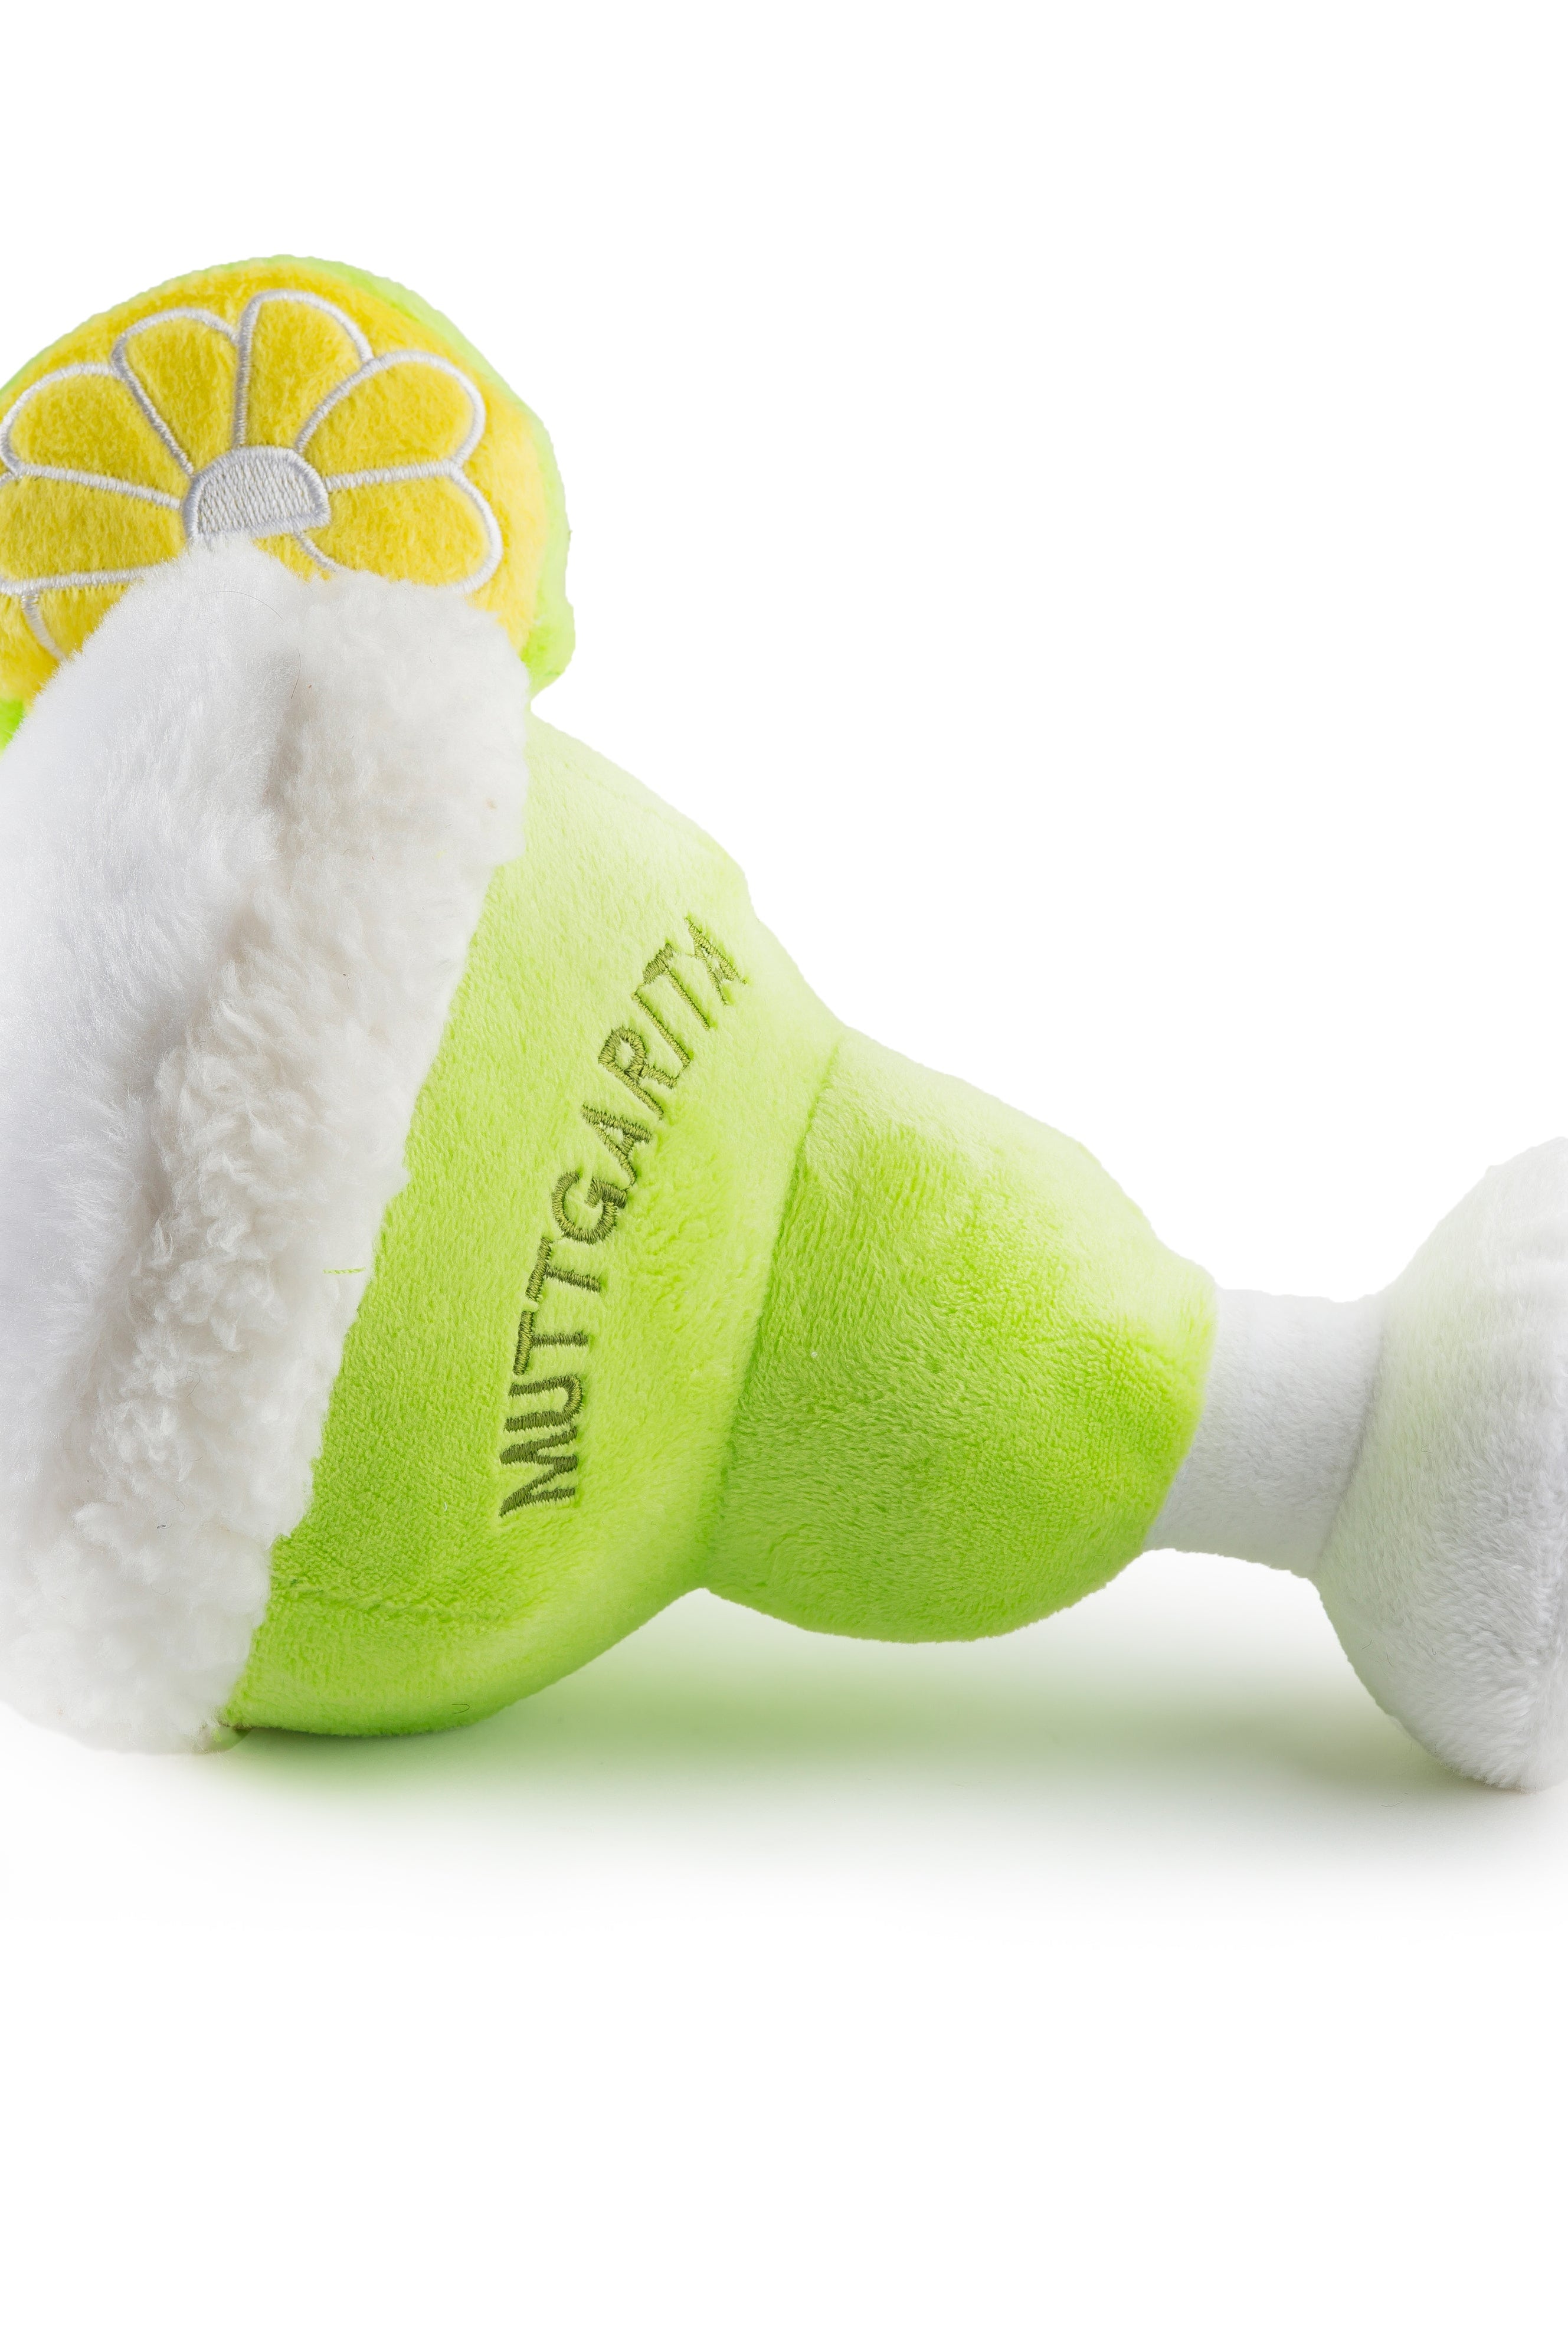 Muttgarita Plush Toy-Pet Toys-Vixen Collection, Day Spa and Women's Boutique Located in Seattle, Washington